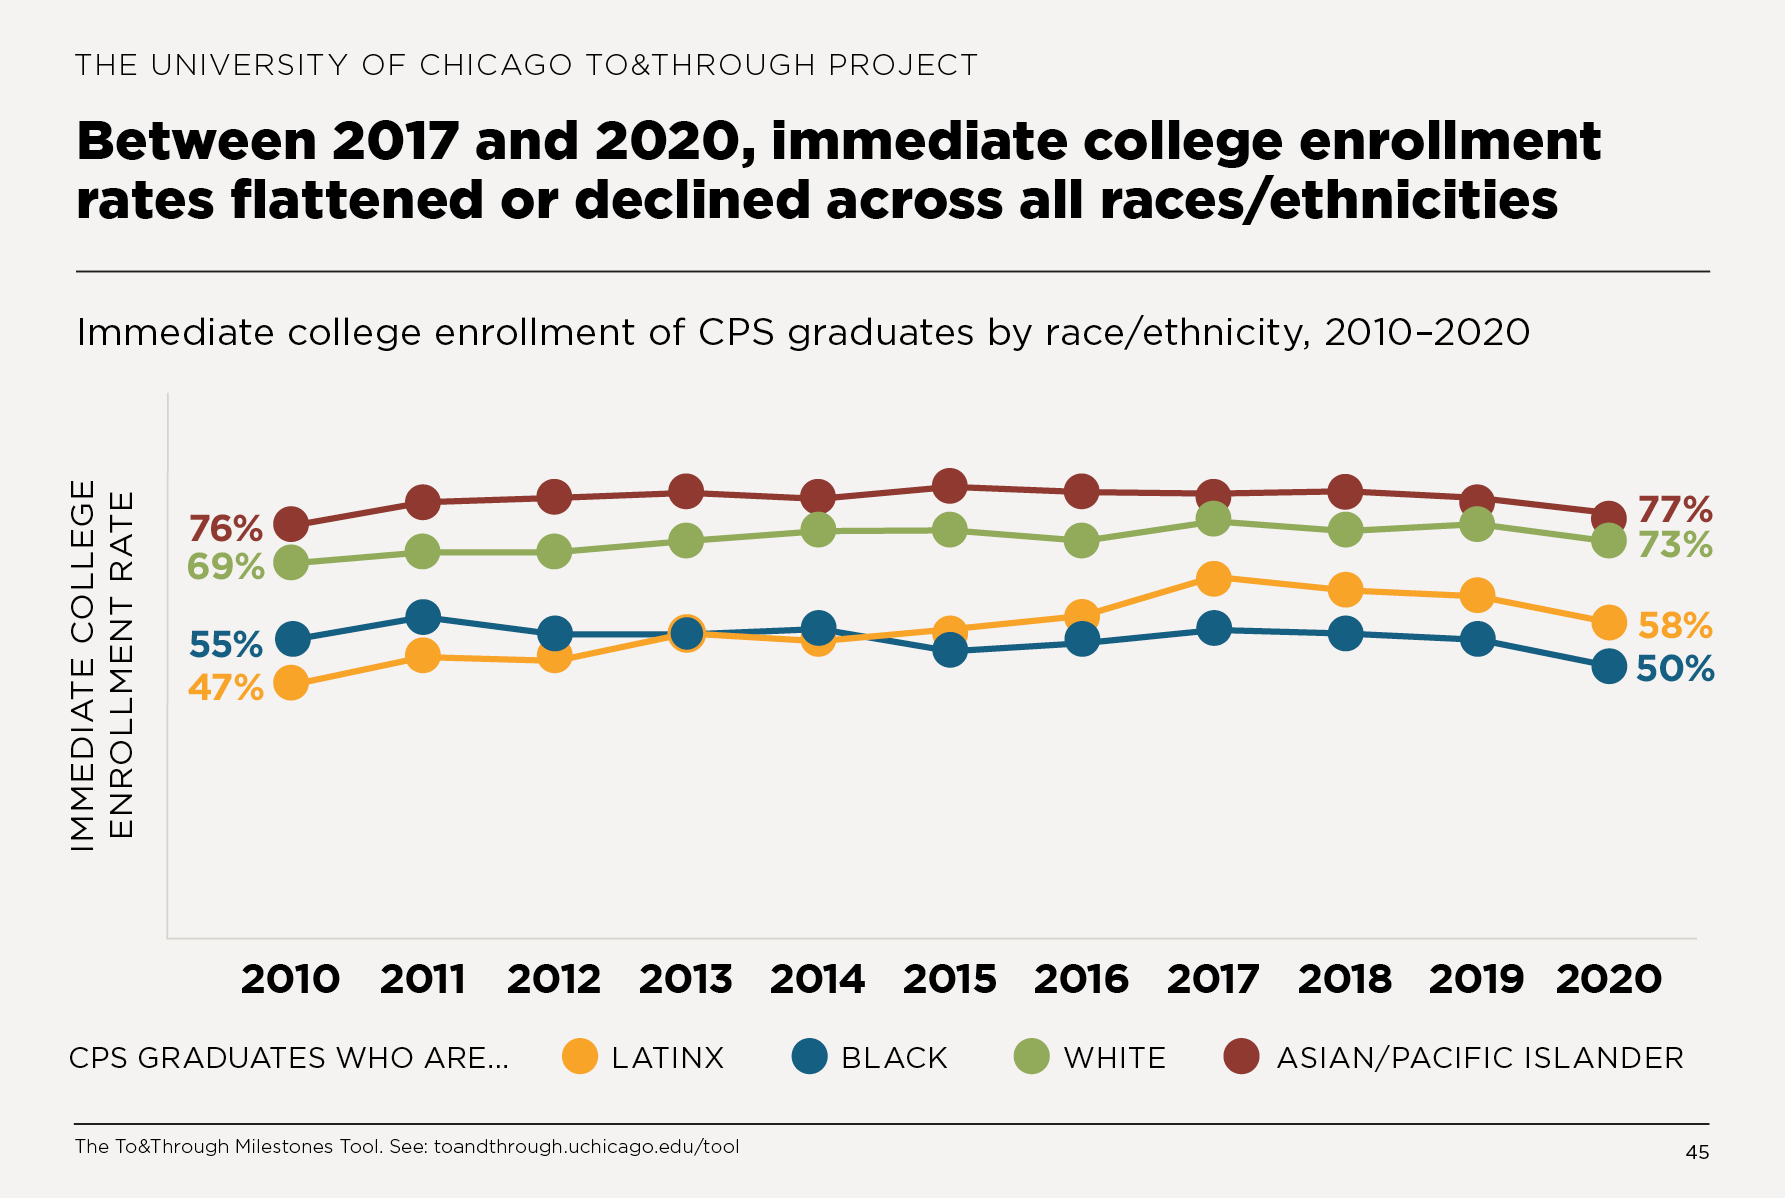 Between 2017 and 2020, immediate college enrollment rates flattened or declined across all races/ethnicities